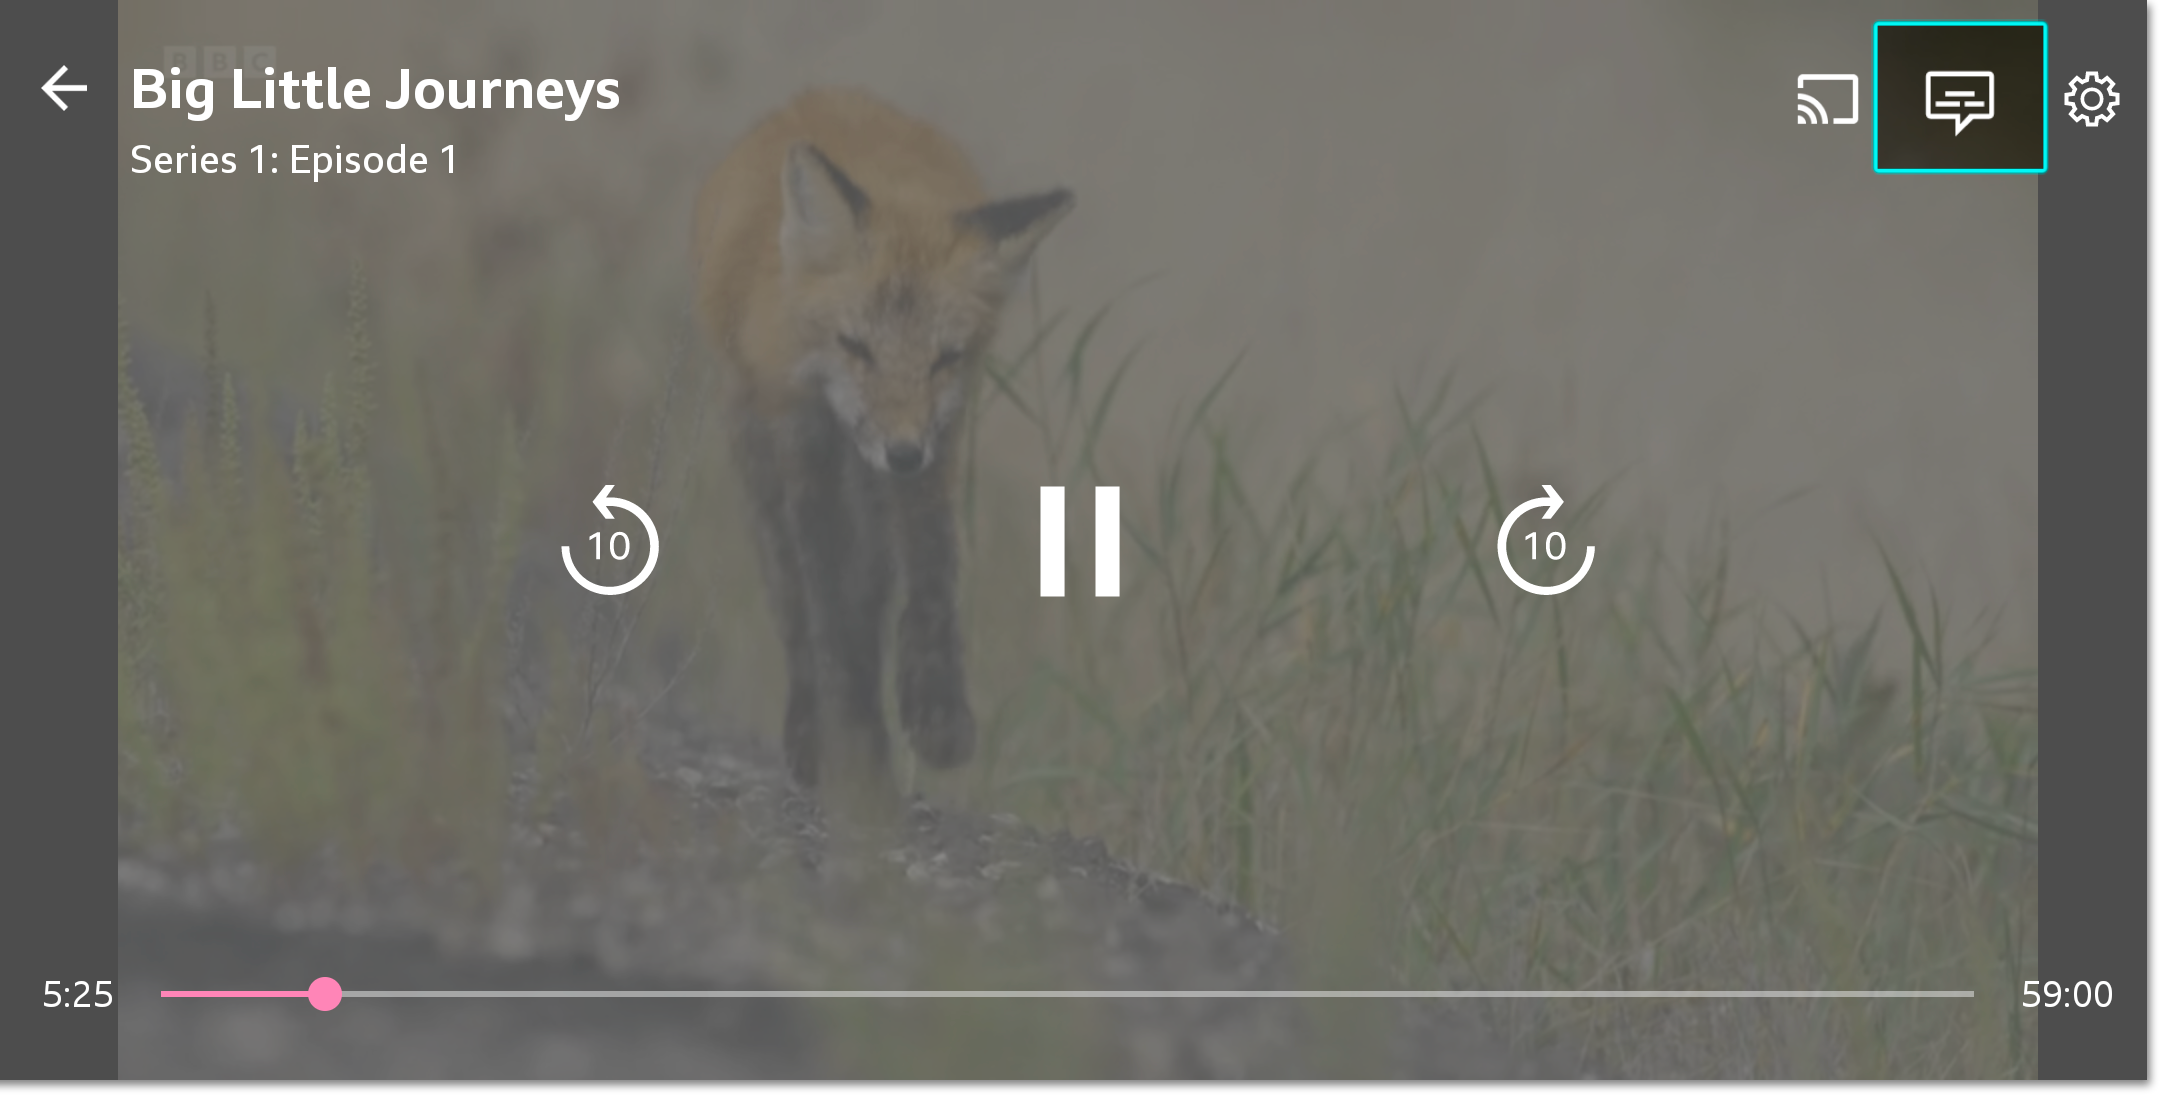 Image of the playback screen on the iPlayer mobile app. The accessibility icon (a speech bubble) is highlighted on the top right of the screen